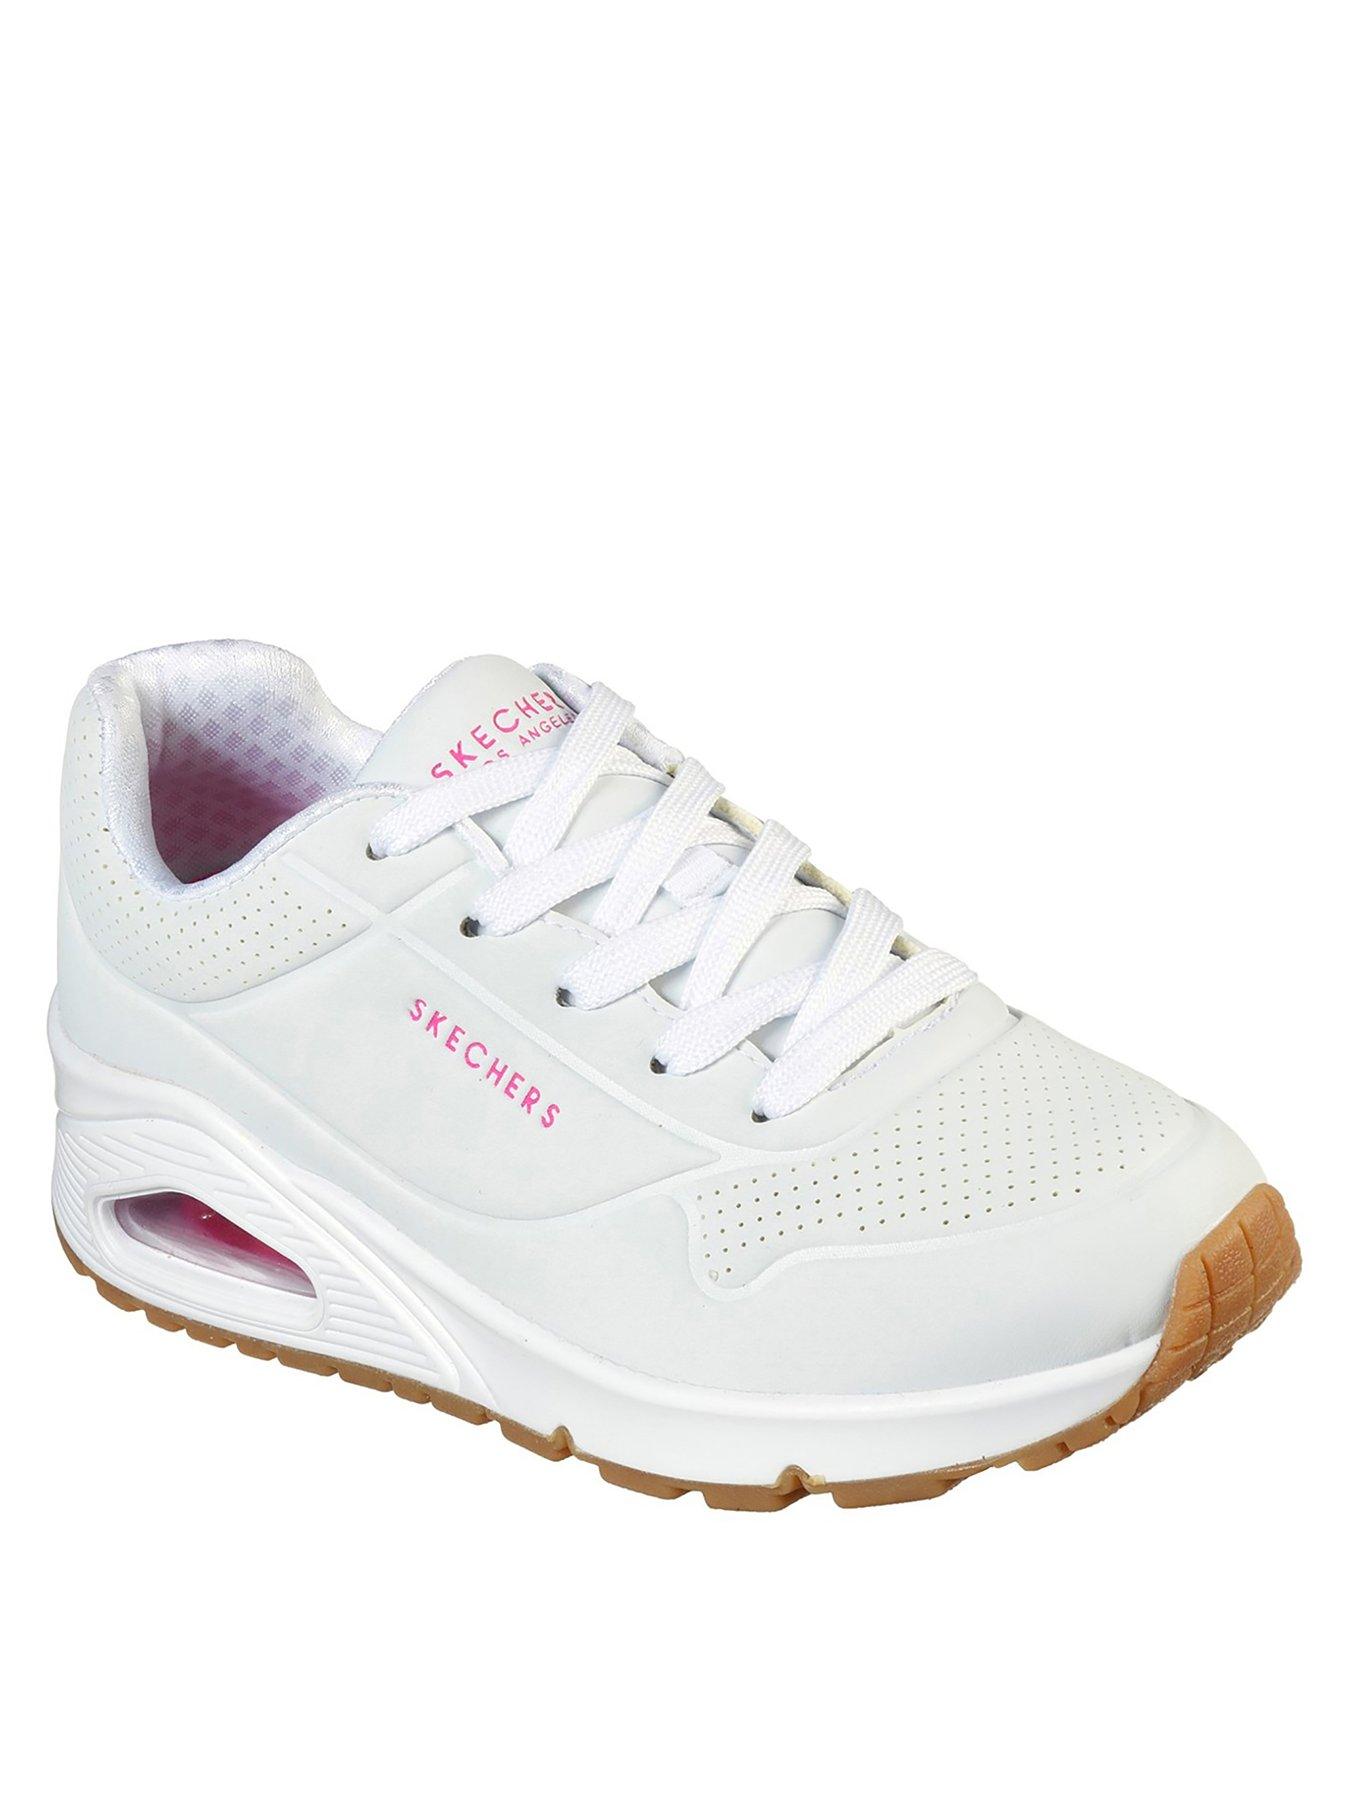 Skechers Uno Stand On Air Trainers - White | littlewoods.com